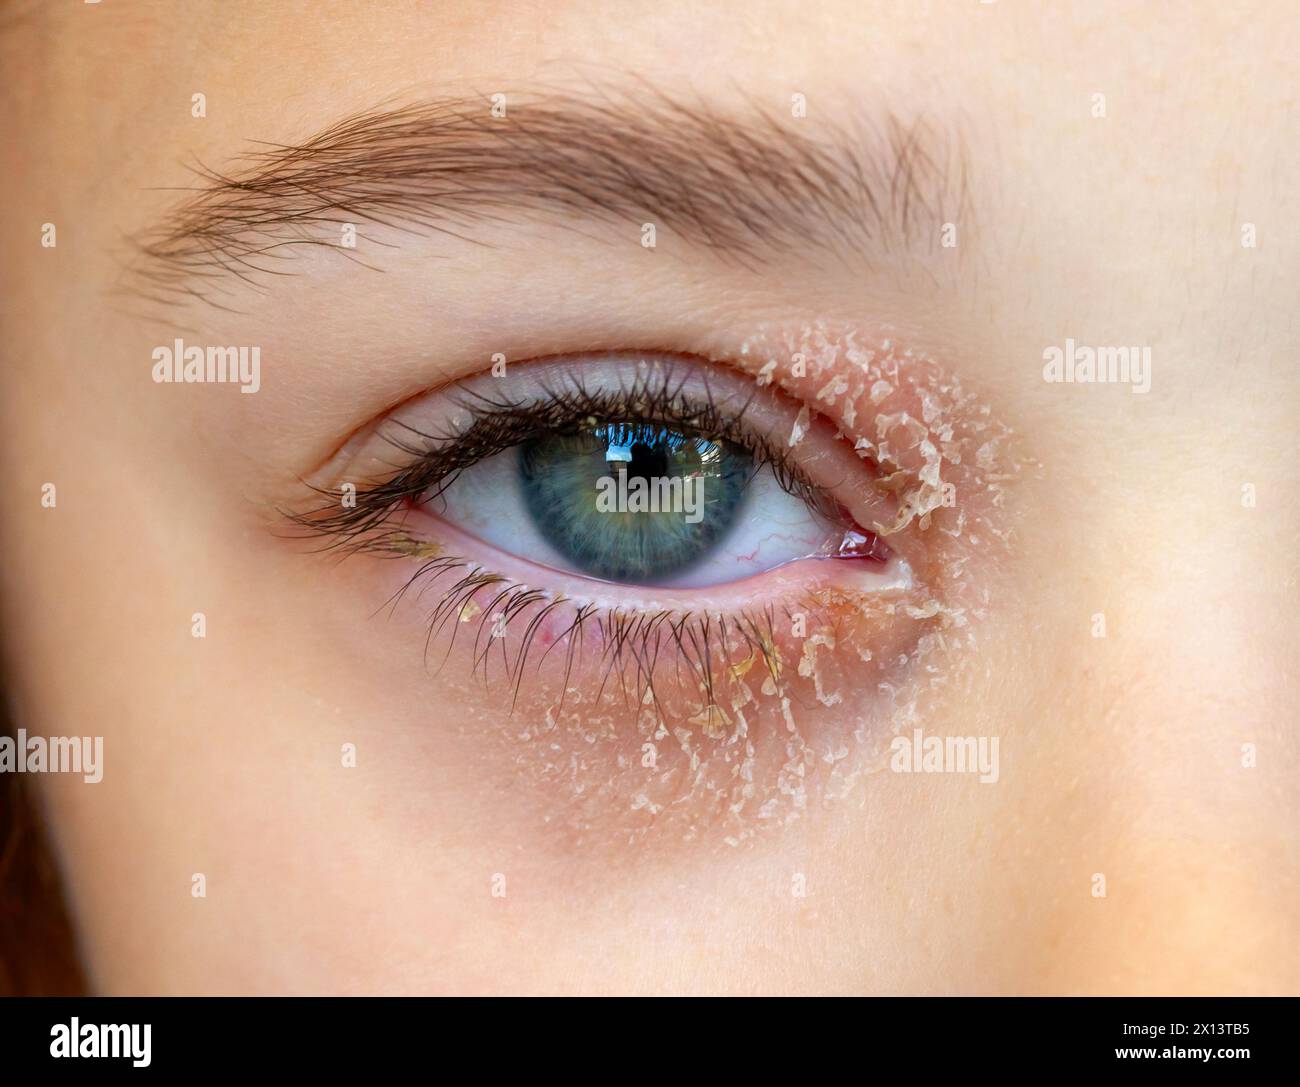 Eye of a little girl suffering from ocular atopic dermatitis or eyelid eczema. Stock Photo